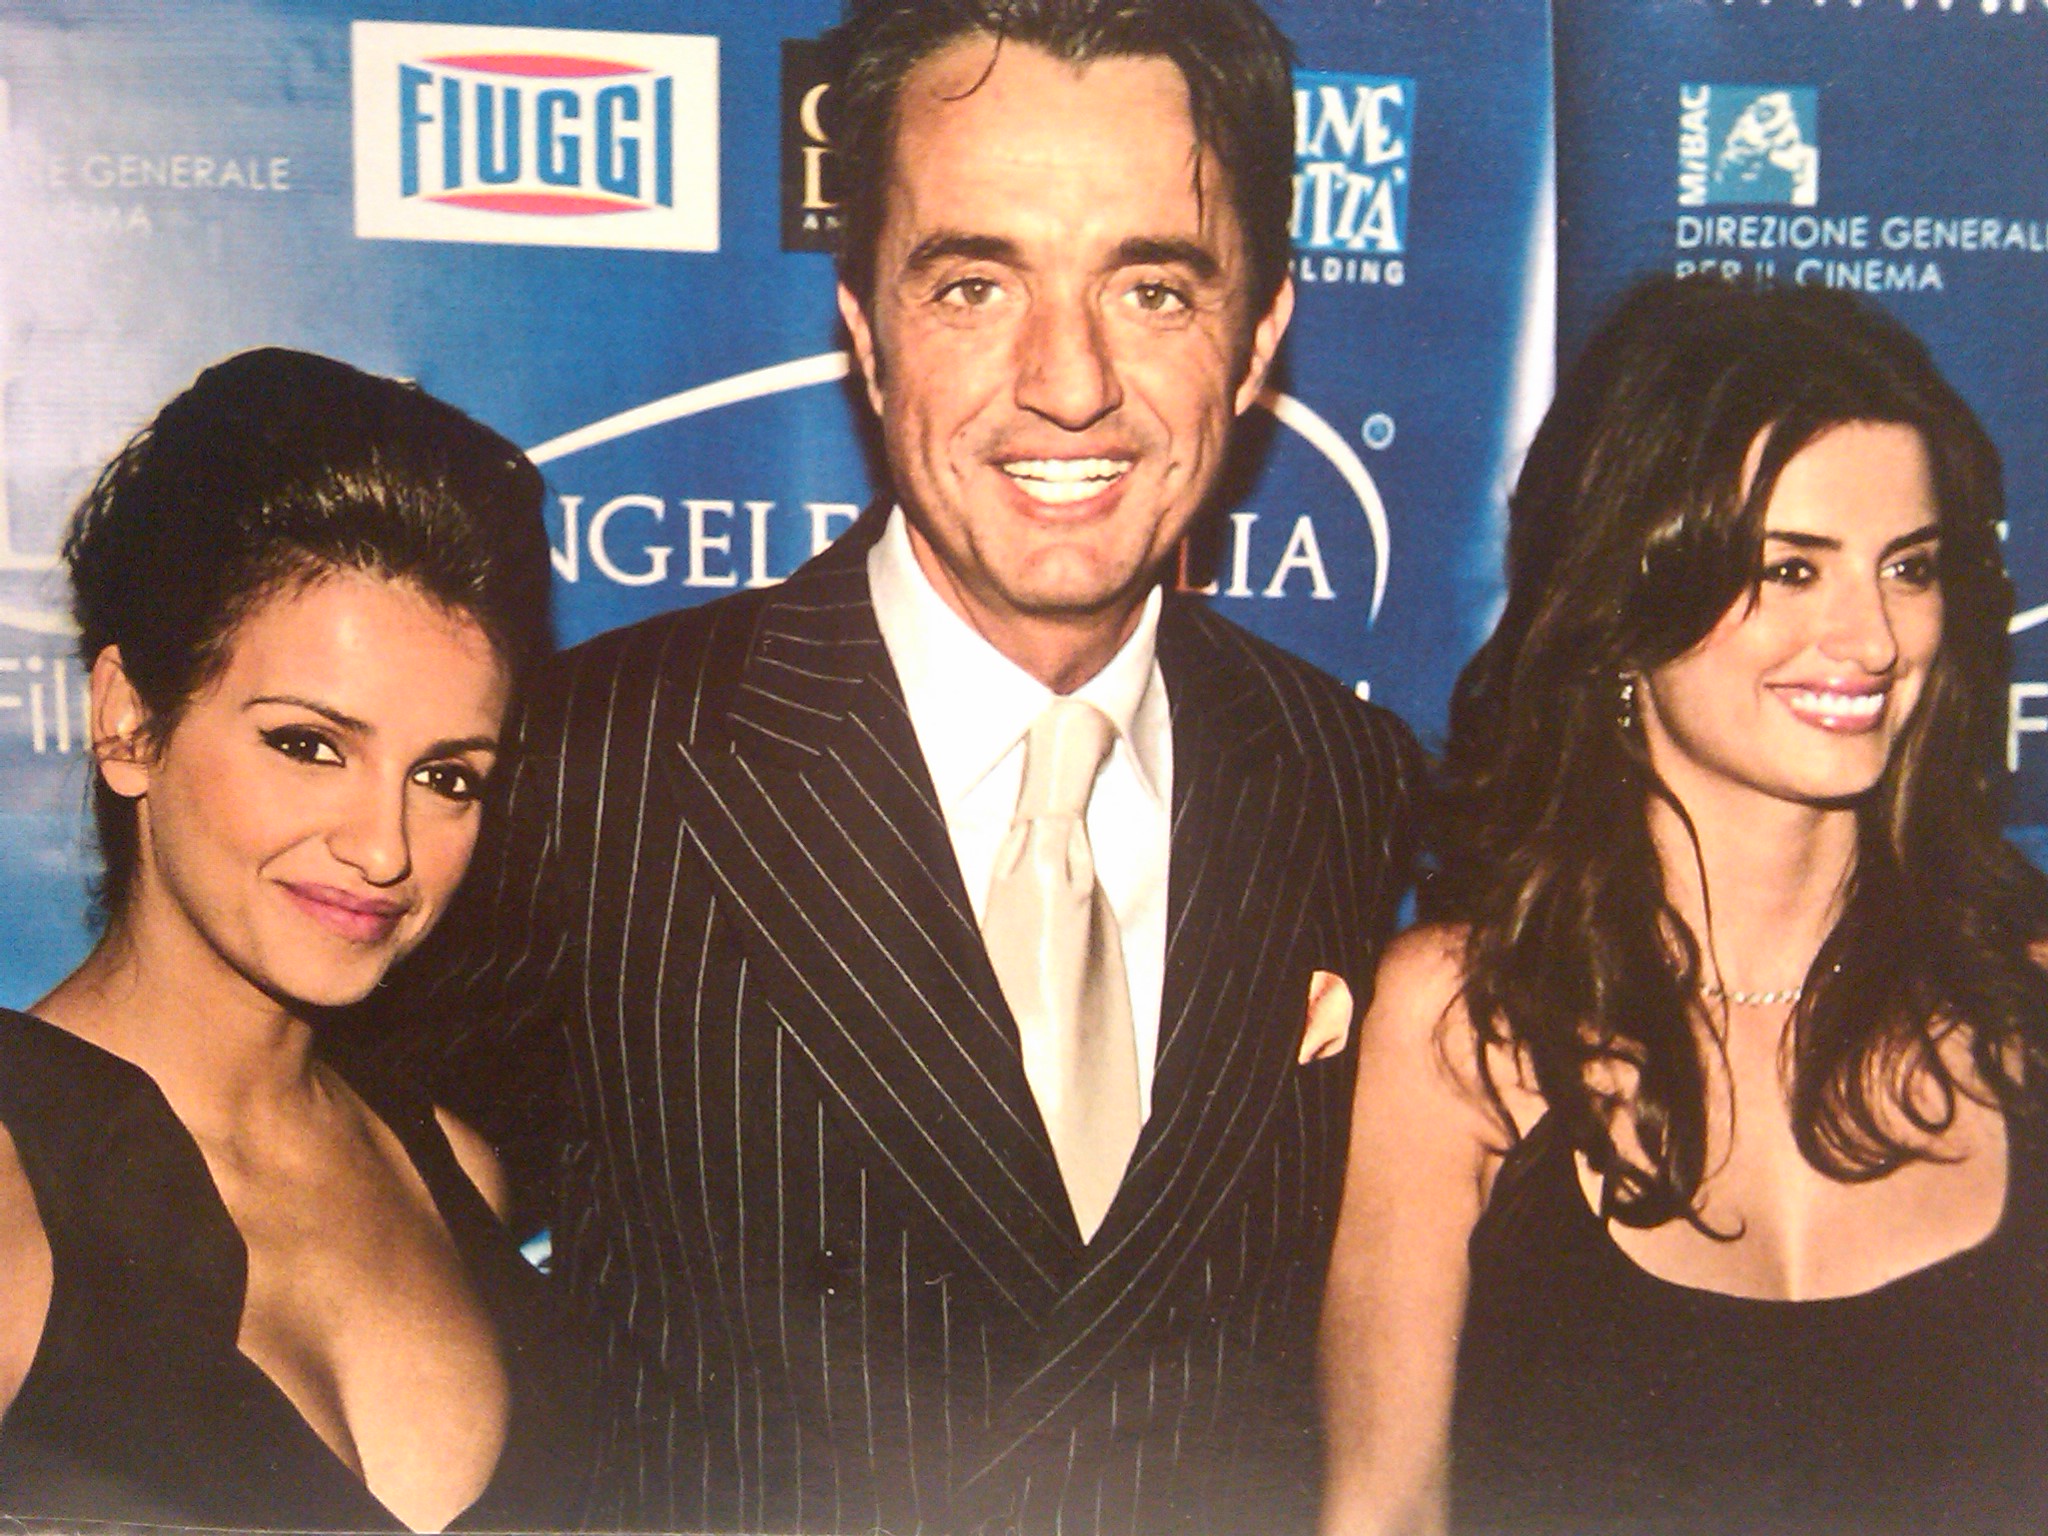 *THE FINAL INQUIRY* World Premiere, Los Angeles, 2007- Giulio Base, director, stands between Monica Cruz (starring in the movie) and her sister Penelope